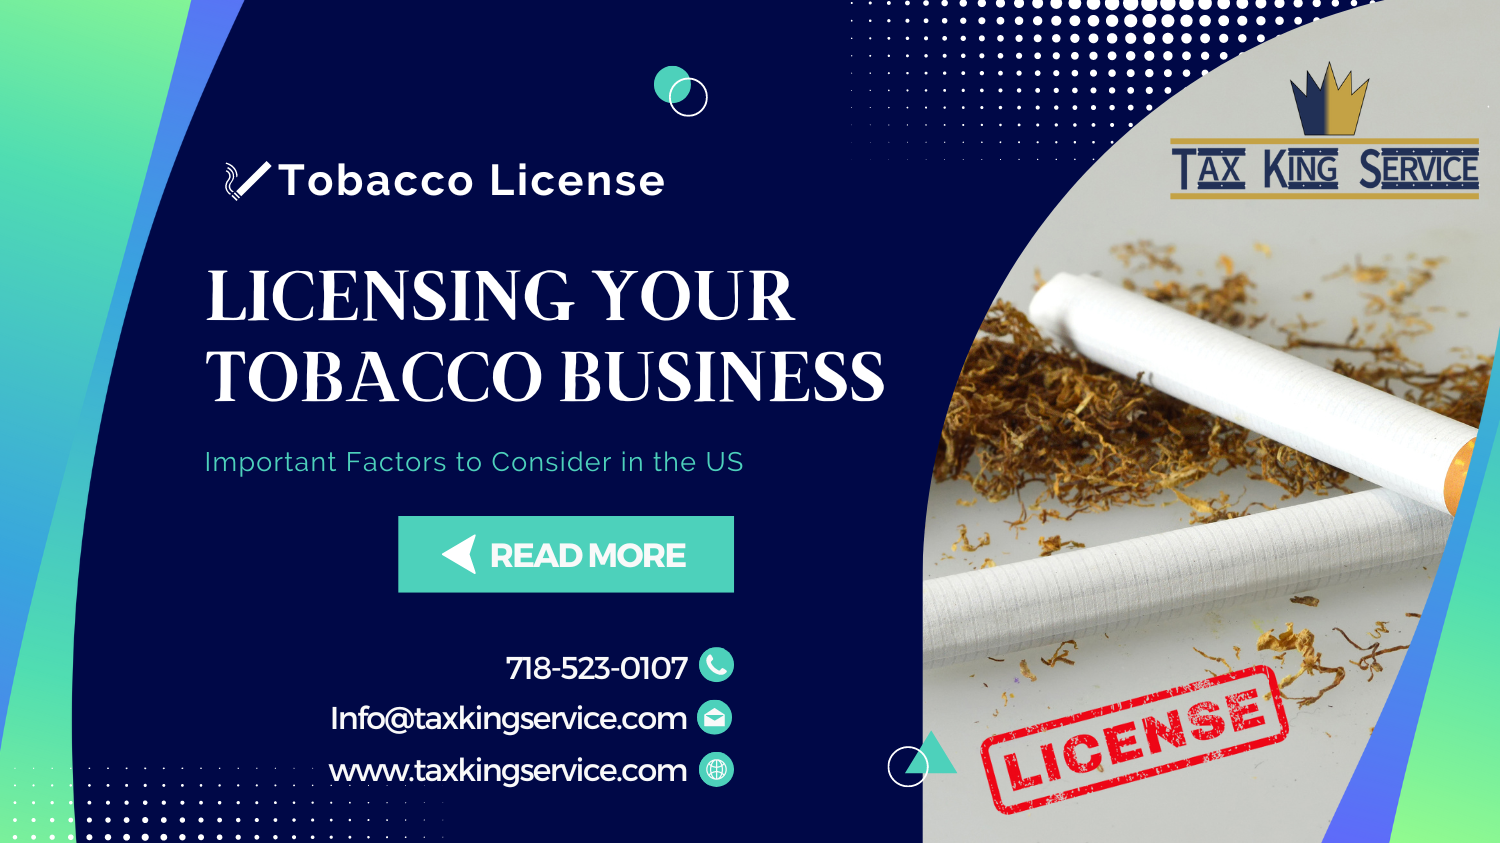 Tobacco Business